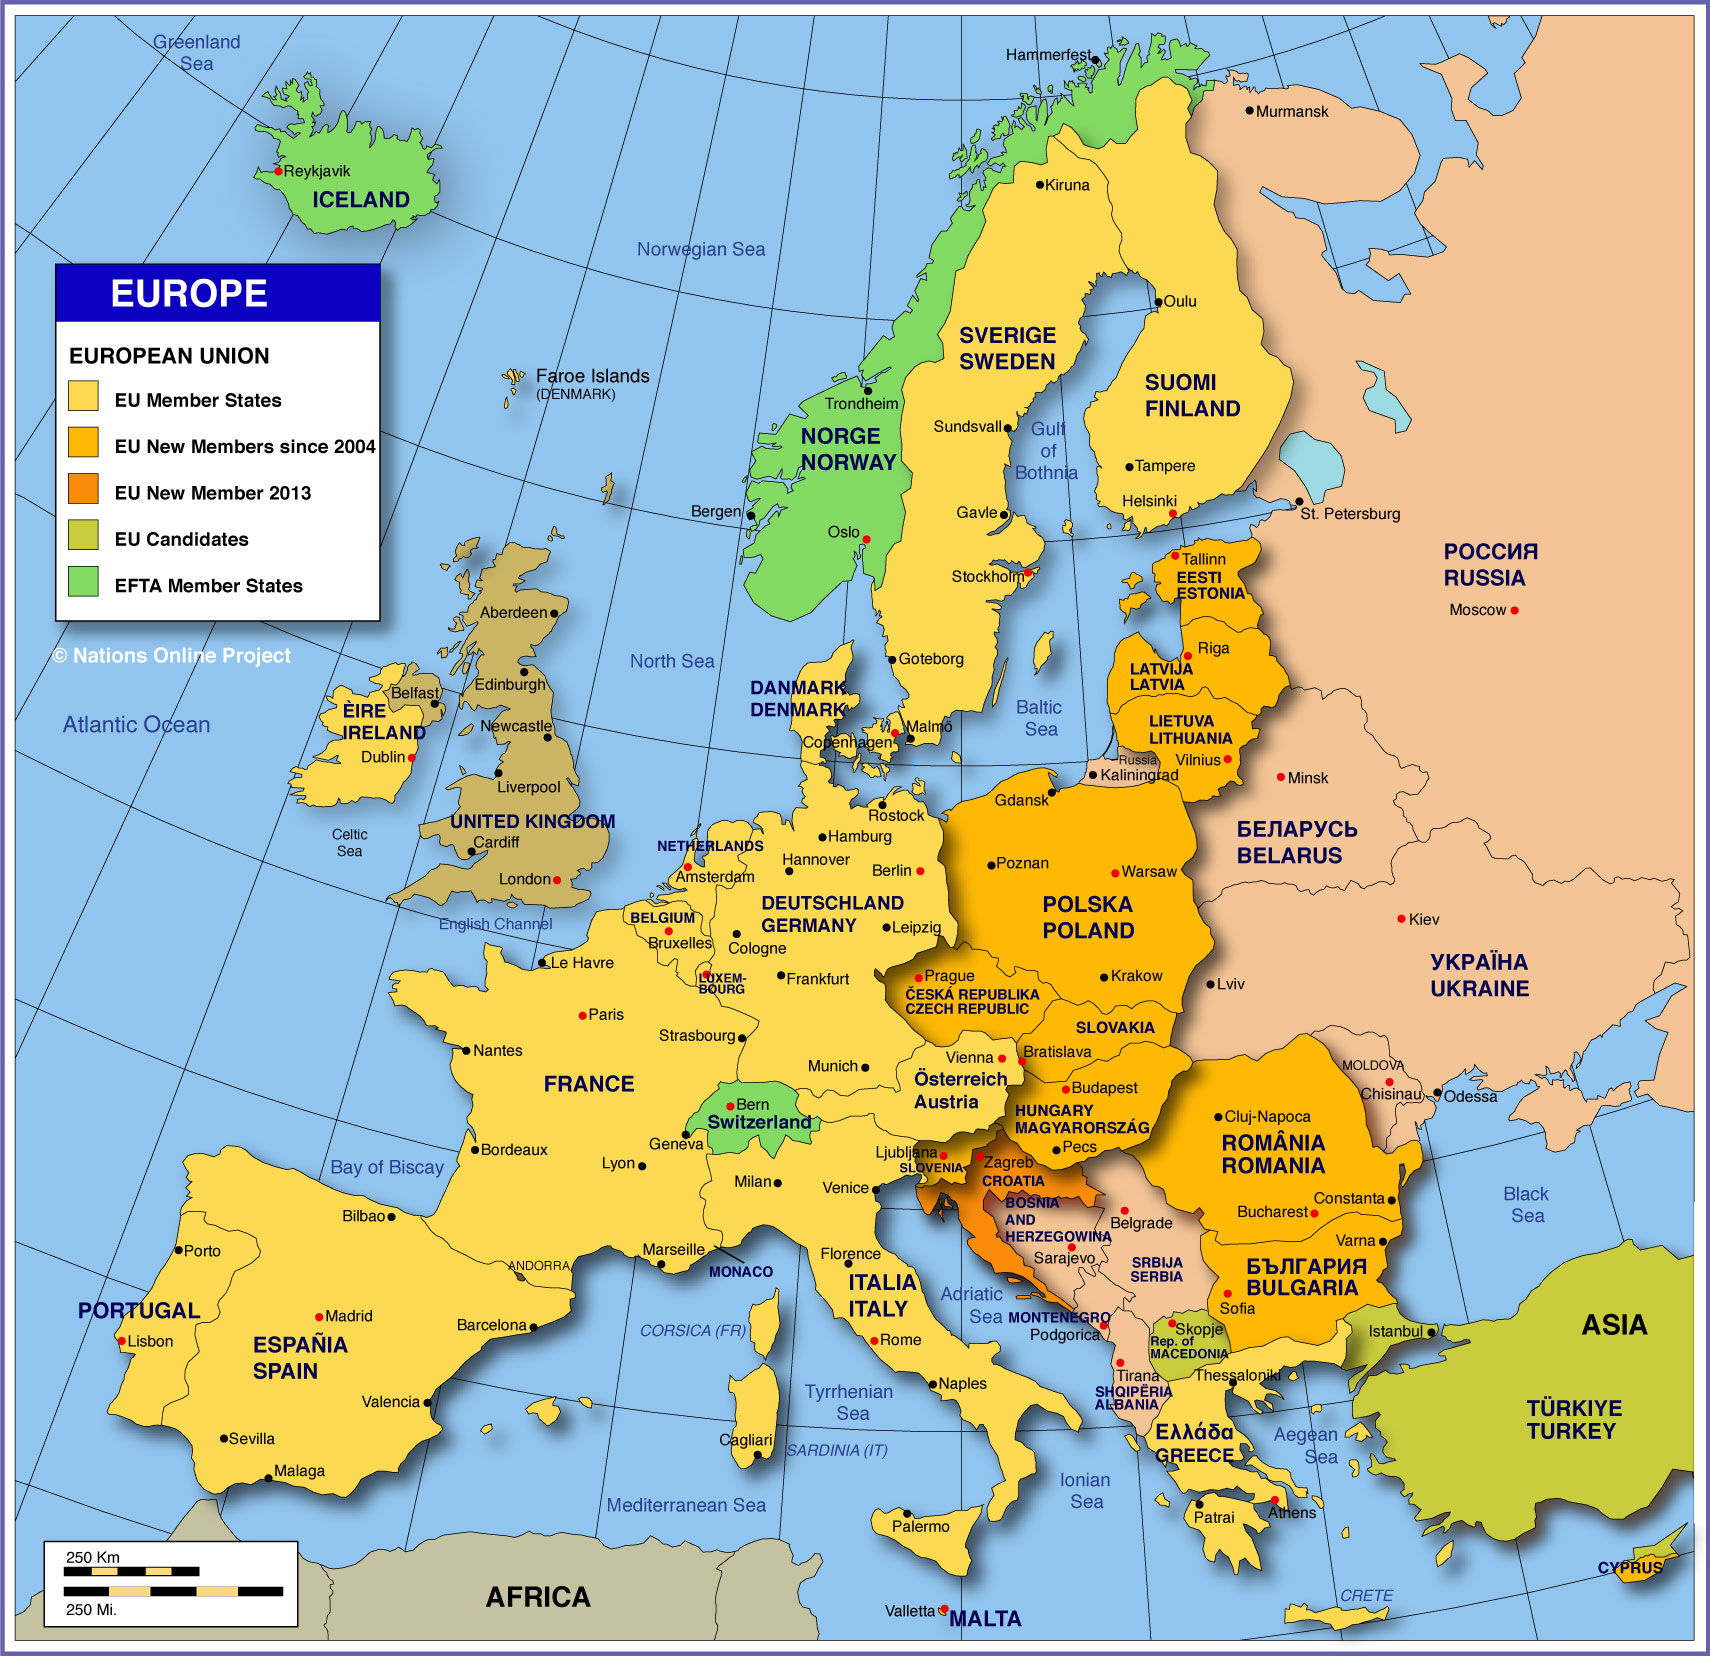 map of europe with cities and countries Map Of Europe Member States Of The Eu Nations Online Project map of europe with cities and countries